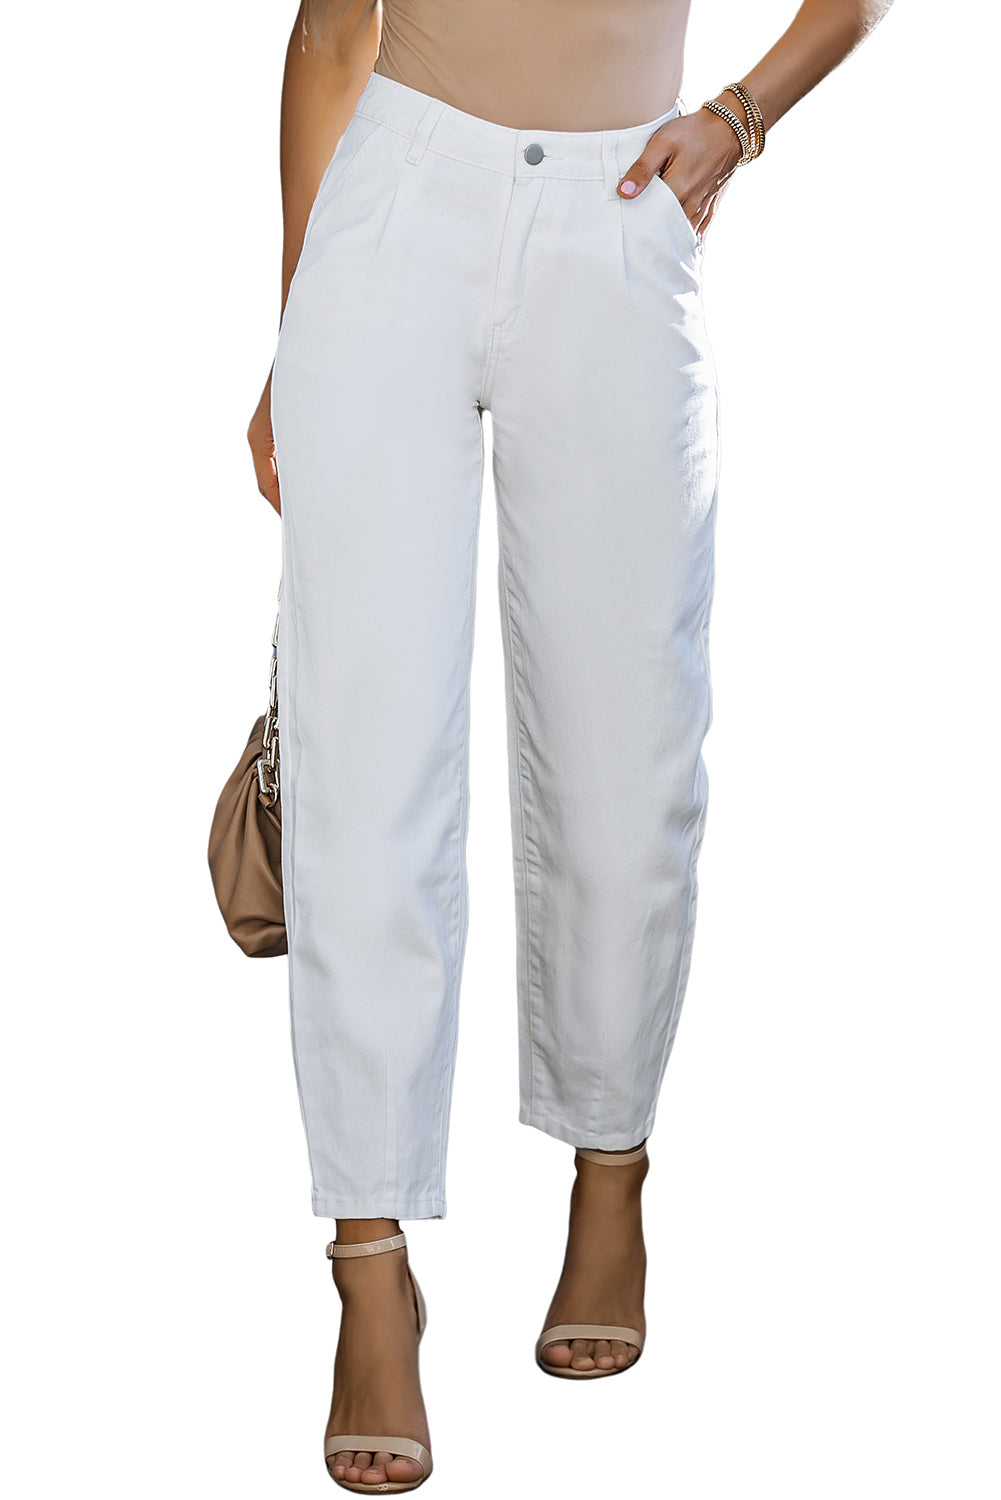 White Solid Casual High Waist Straight Leg Pants - Cowtown Bling N Things